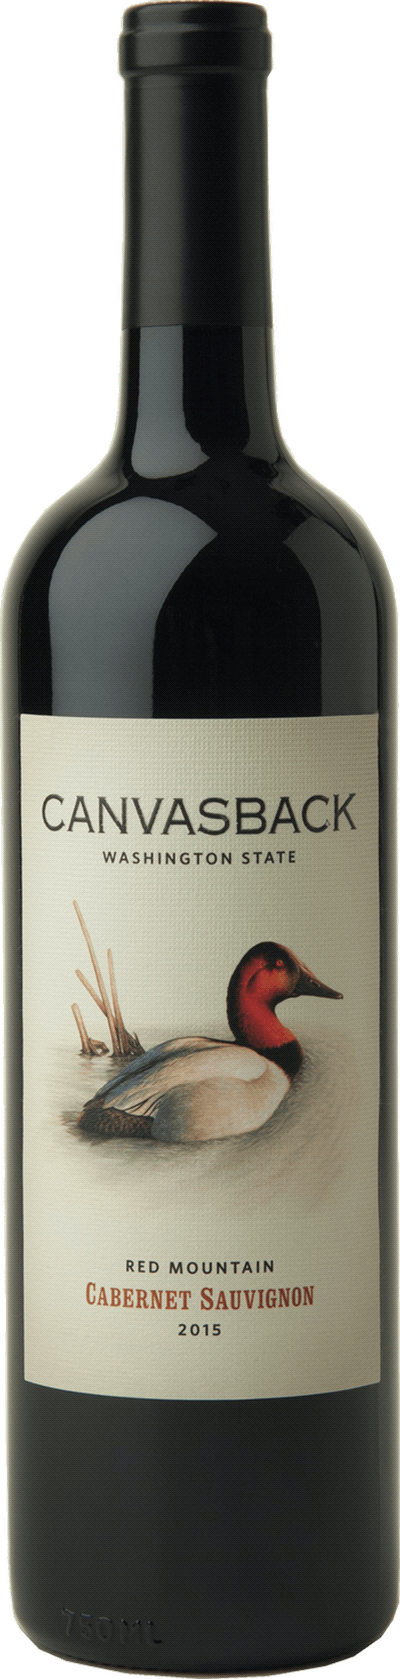 State Canvasback 2018 Washington | Mountain Systembolaget Cabernet Sauvignon, Red